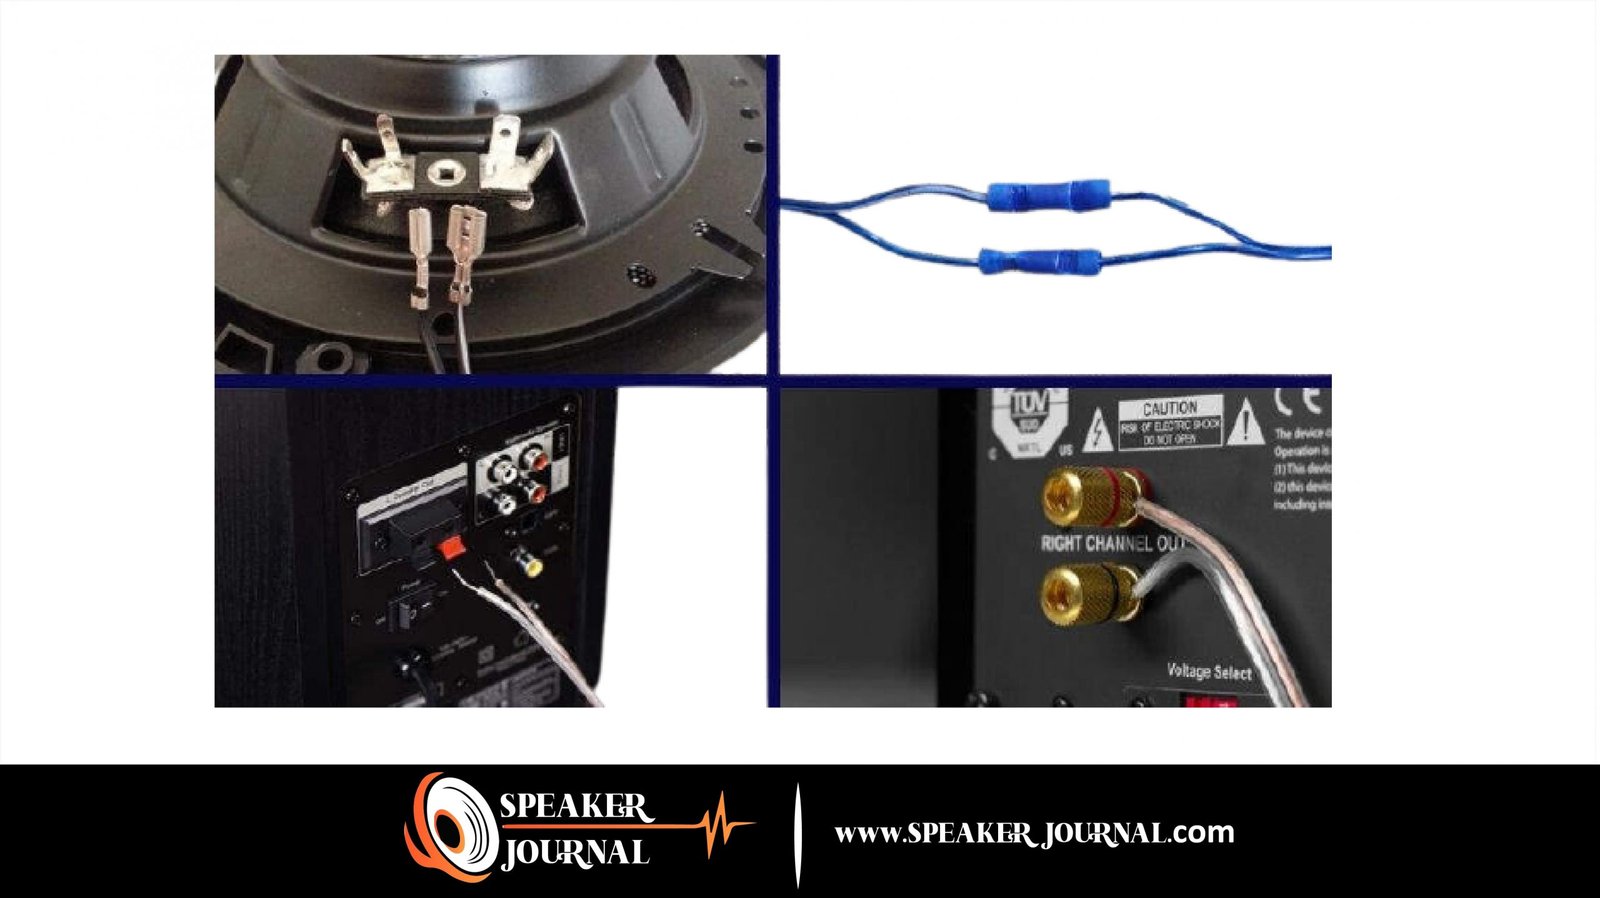 How To Connect A Subwoofer With Speaker Wire by speakerjournal.com